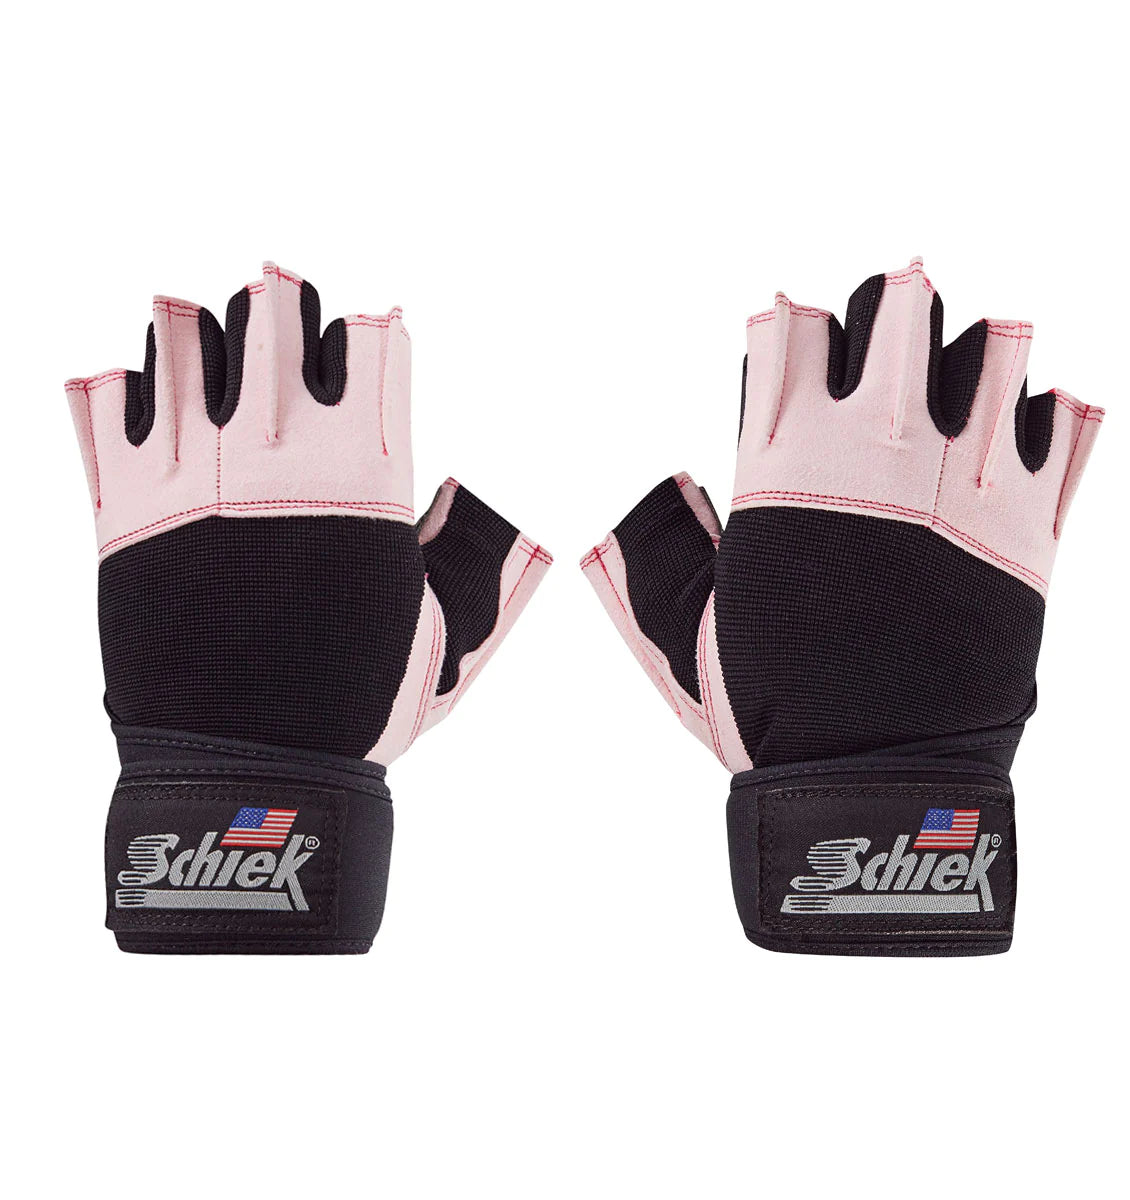 SCHEIK PINK PLATINUM SERIES LIFTING GLOVES WITH WRIST WRAPS | FITNESS EXPERIENCE